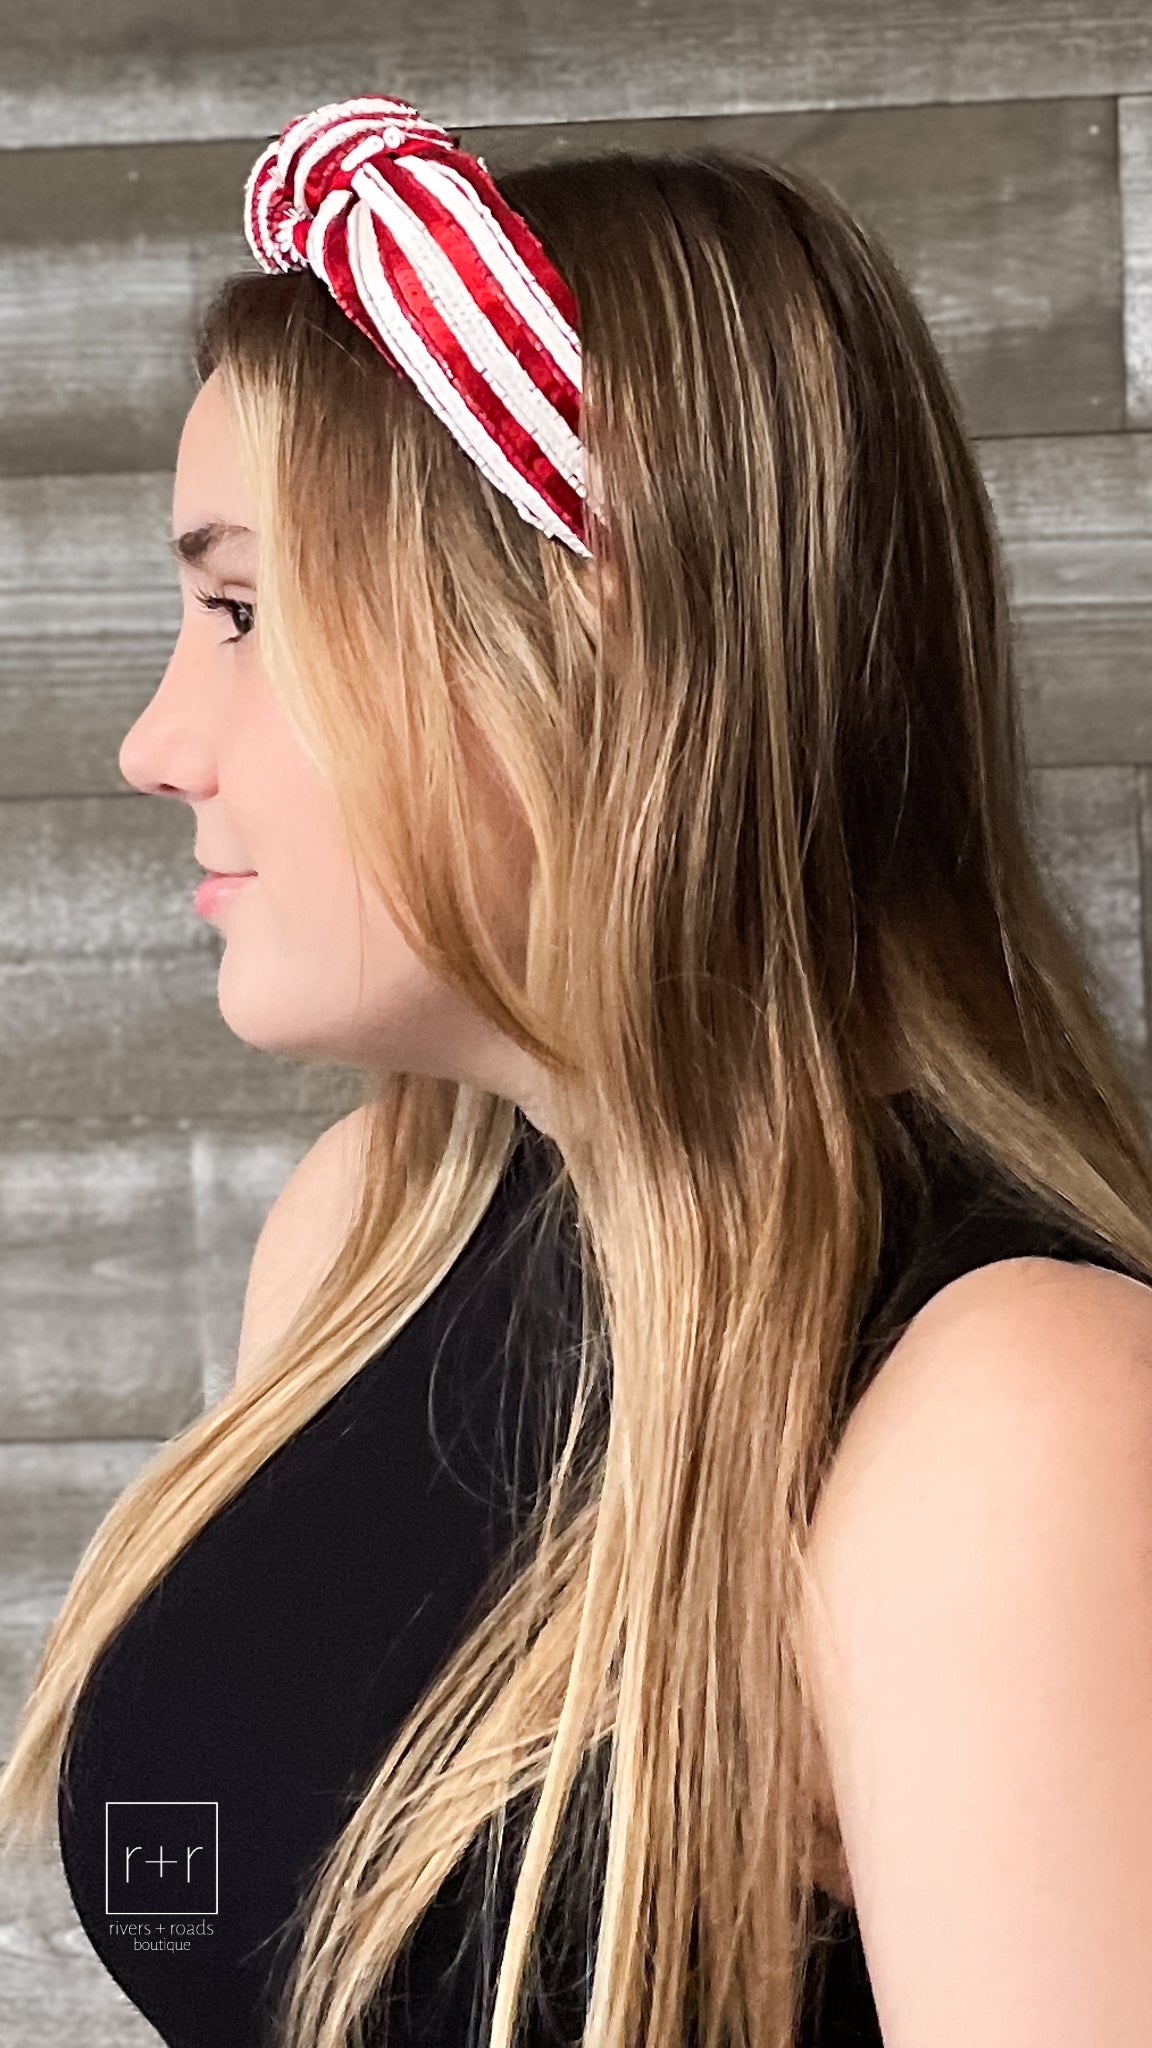 red and white sequin gameday fashion headband